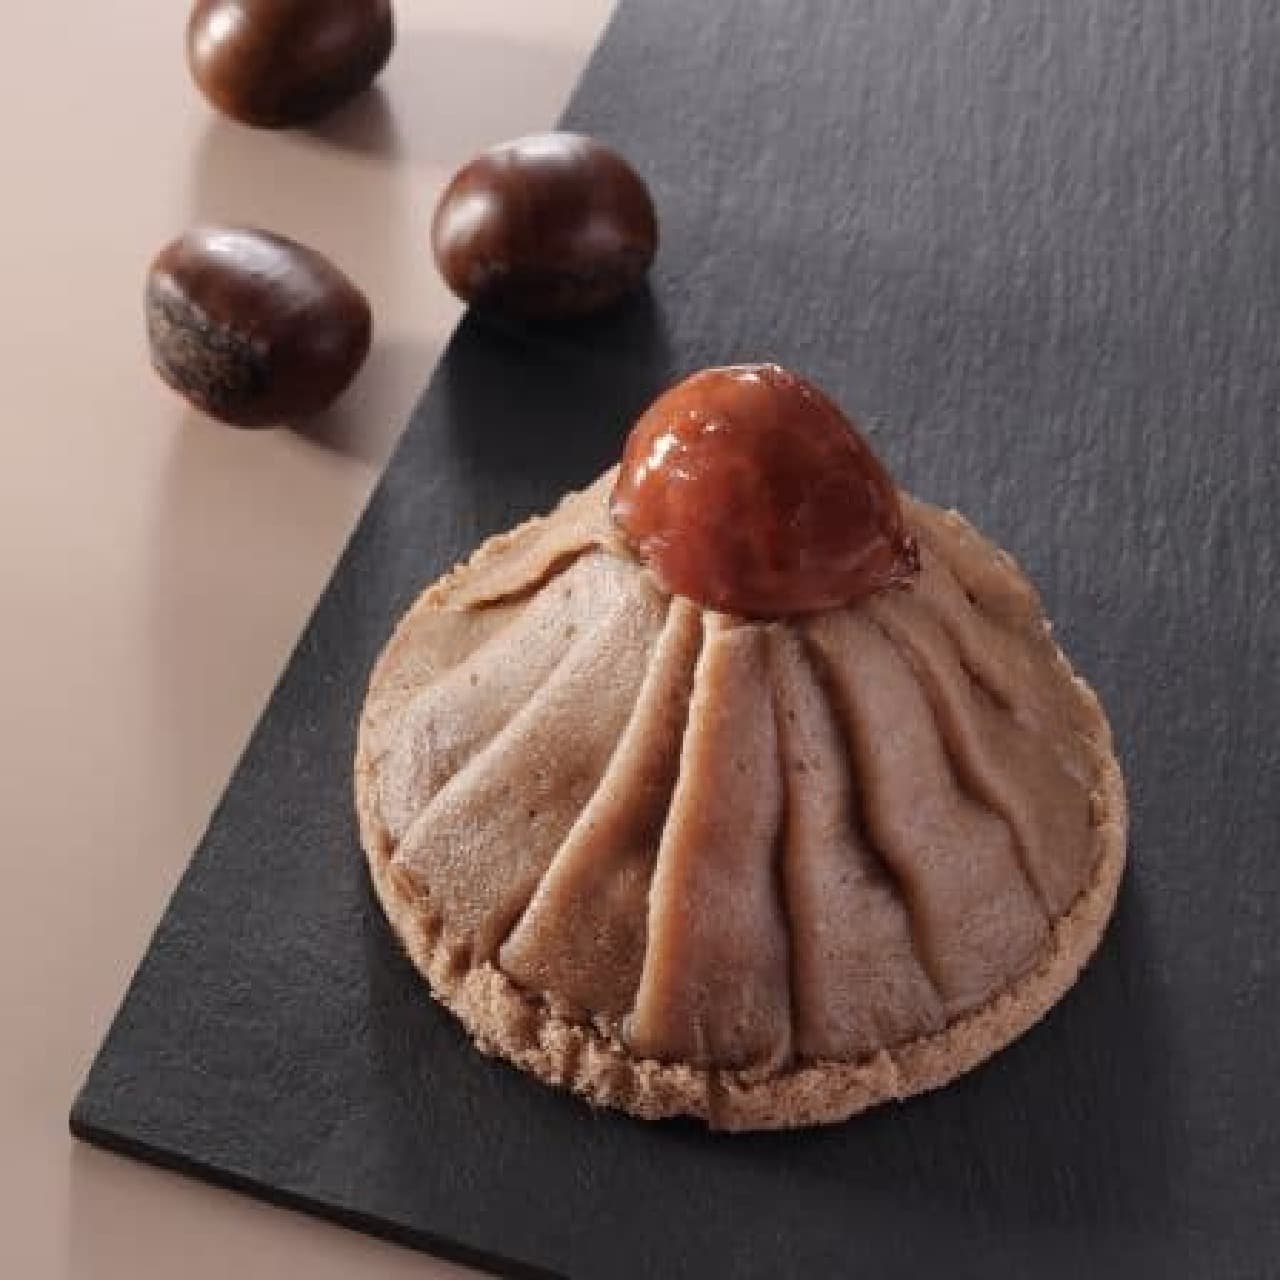 Starbucks "Mont Blanc with chestnuts"